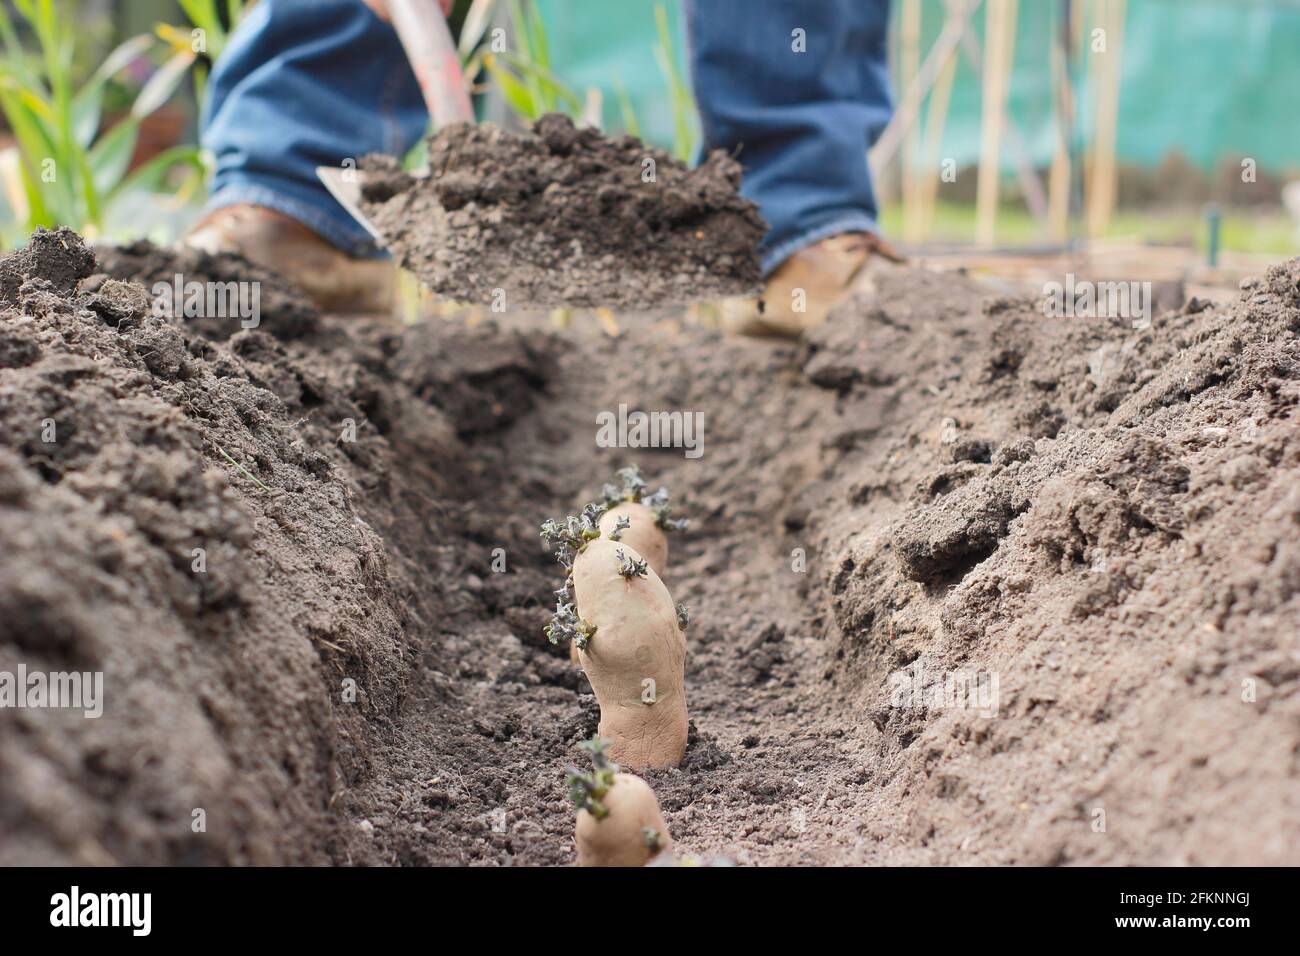 Planting potatoes in a garden. Putting soil onto chitted seed potatoes - Solanum tuberosum 'Ratte' second earlies - planting in a trench. UK Stock Photo